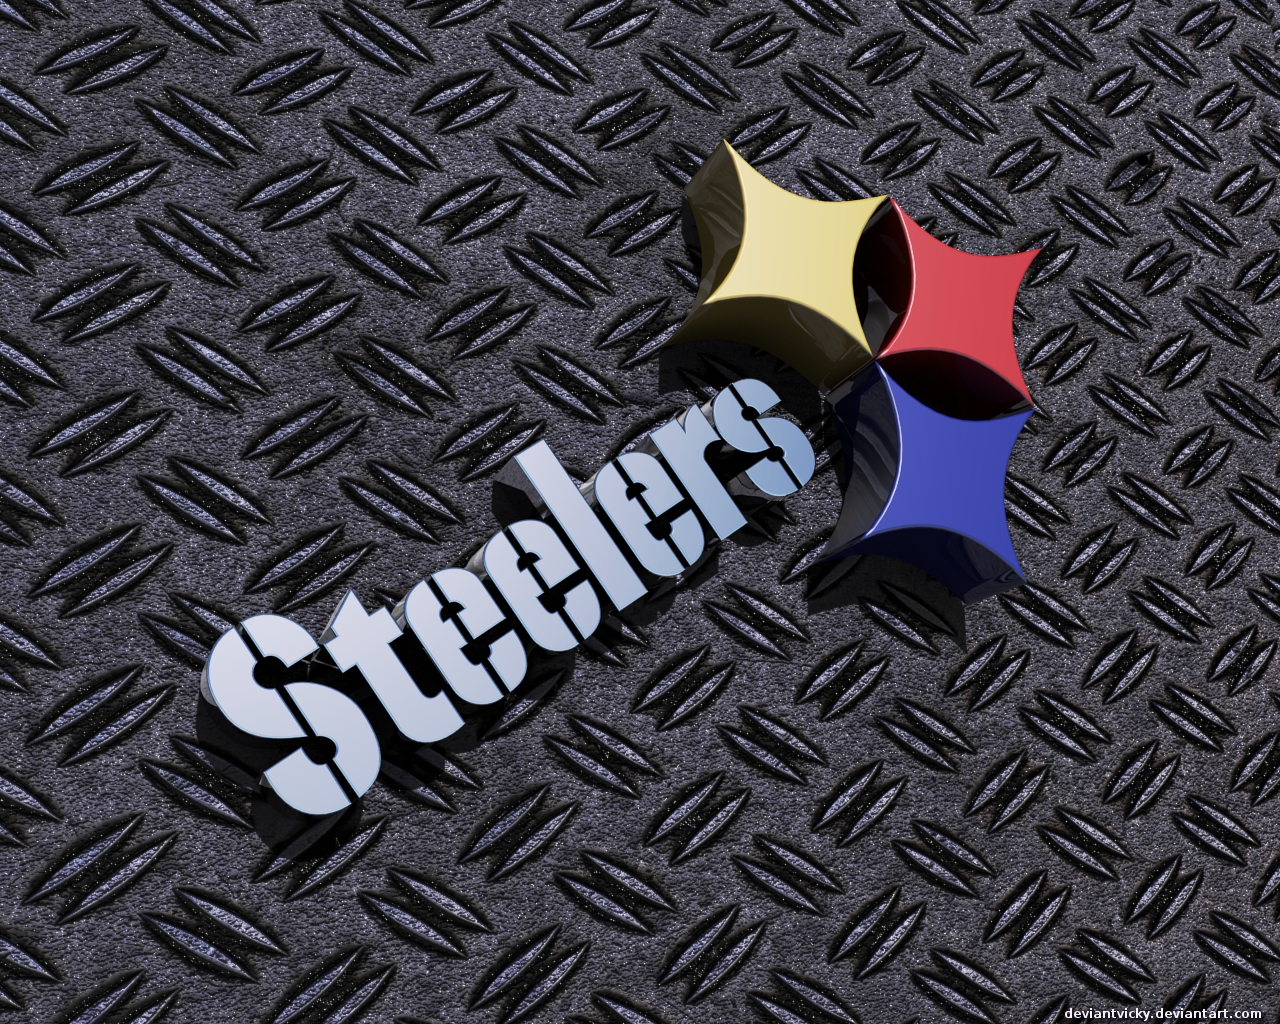 Pittsburgh Steelers Wallpaper Surely You Ll Love This